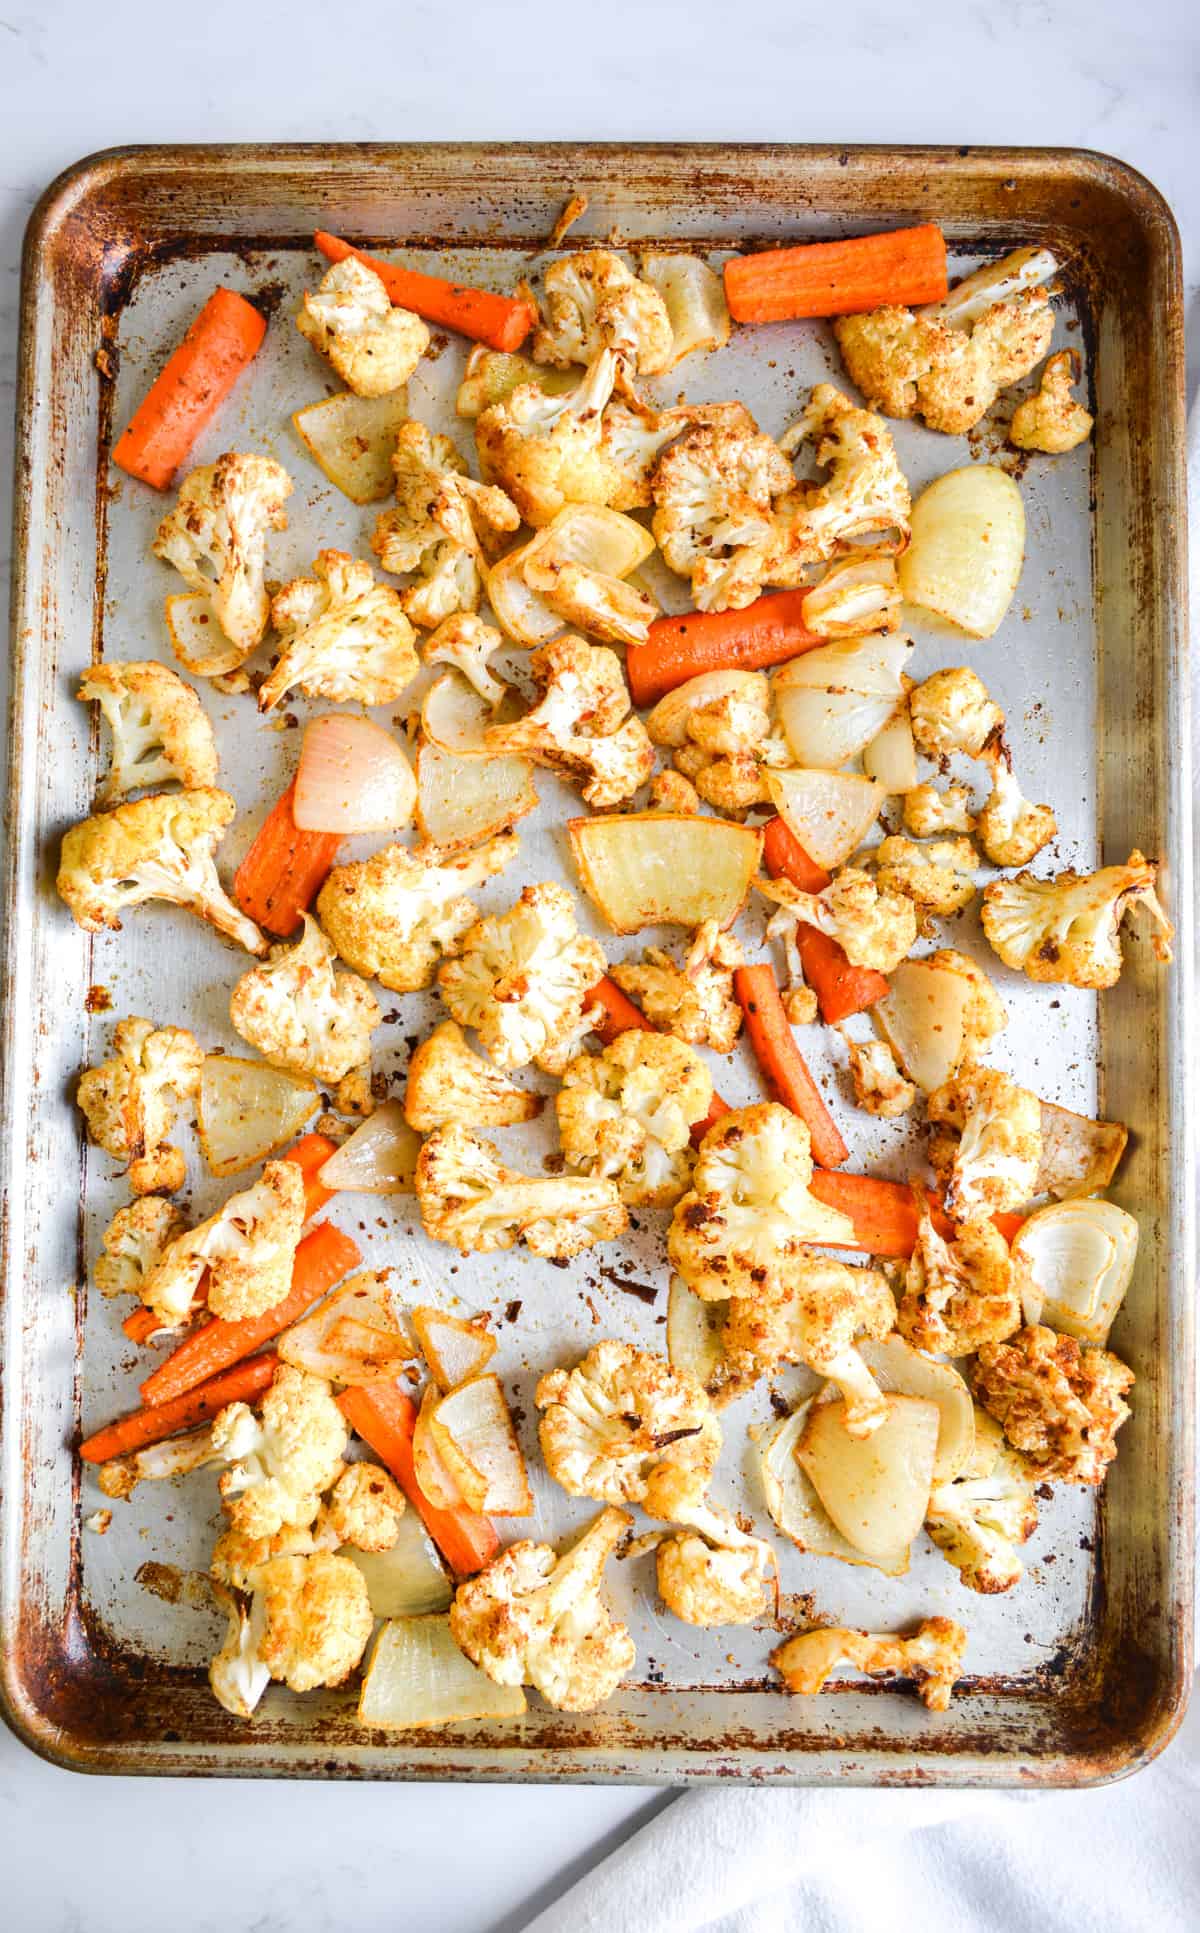 Roasted Vegetables on a Sheet Pan